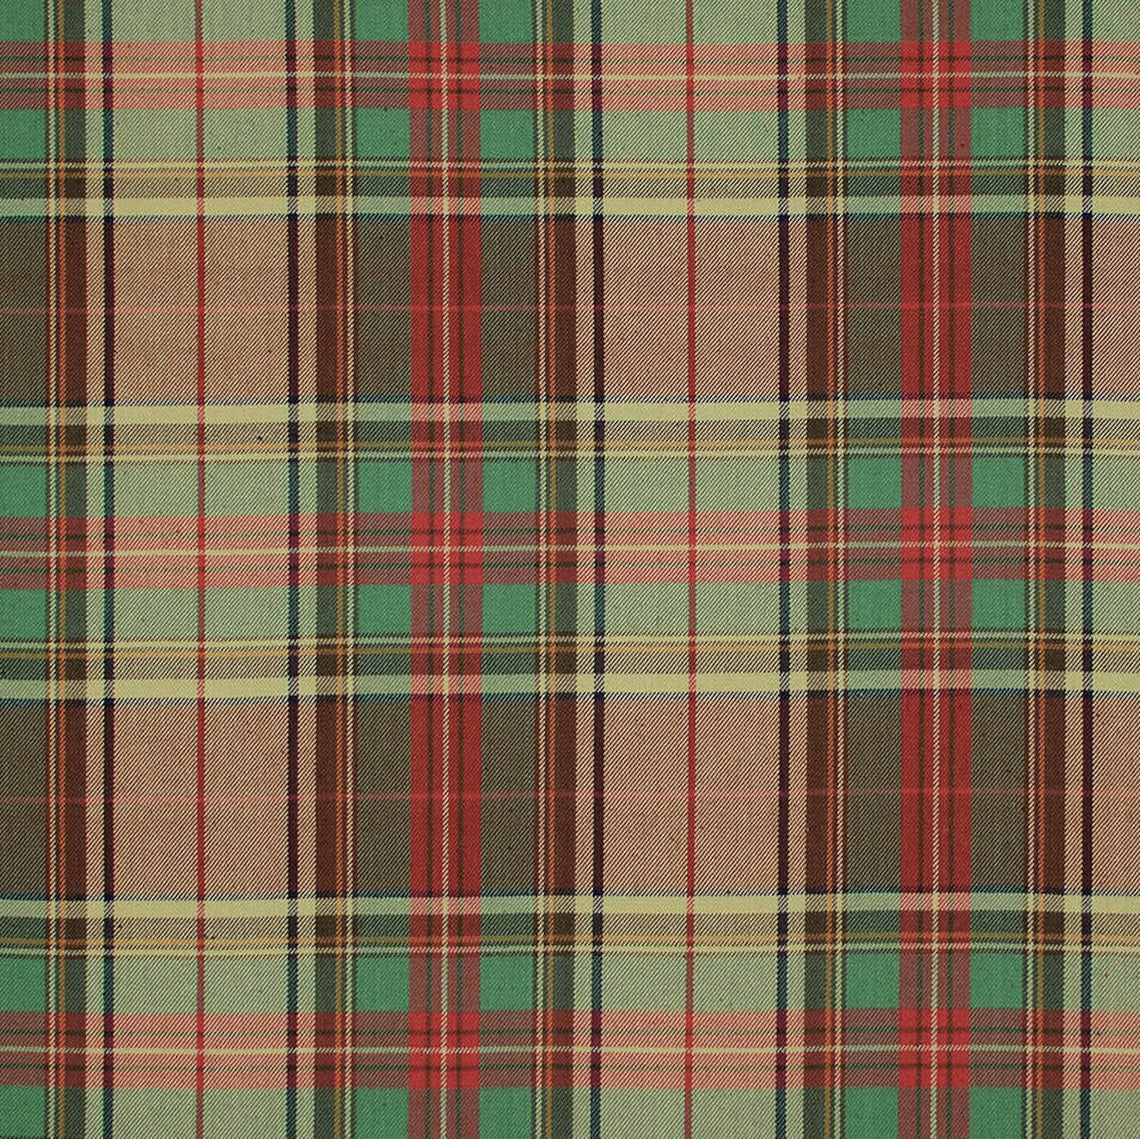 bed scarf in ancient campbell ivy league tartan plaid